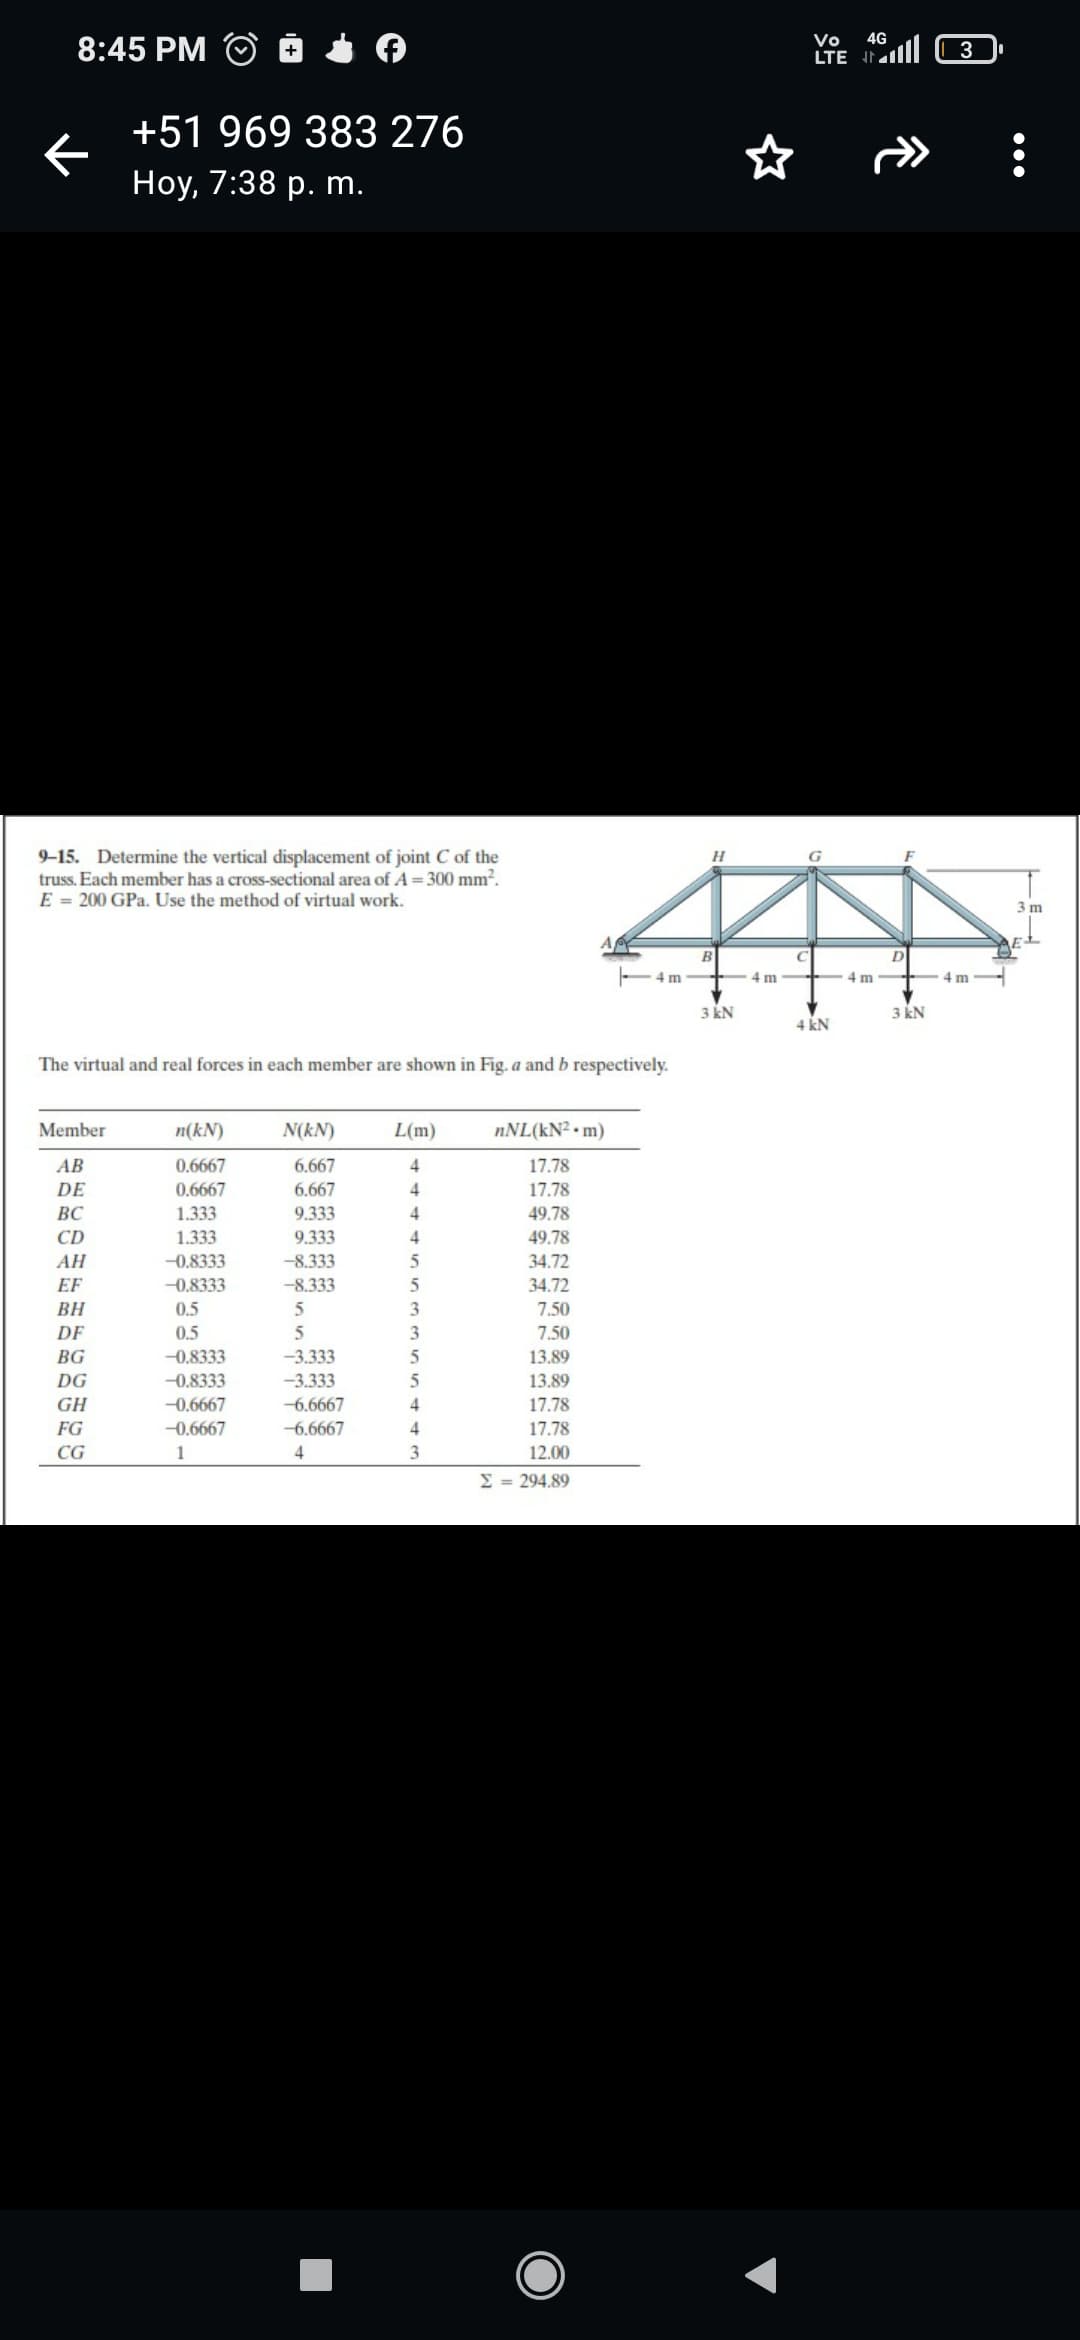 8:45 PM
+51 969 383 276
Hoy, 7:38 p. m.
9-15. Determine the vertical displacement of joint C of the
truss. Each member has a cross-sectional area of A = 300 mm².
E=200 GPa. Use the method of virtual work.
H
Vo
4G
LTE
3
D
4 m
4 m
+4m
+
4 m
3 kN
3 kN
4 kN
The virtual and real forces in each member are shown in Fig. a and b respectively.
Member
n(kN)
N(kN)
L(m)
nNL(kN2 m)
AB
0.6667
6.667
4
17.78
DE
0.6667
6.667
4
17.78
BC
1.333
9.333
4
49.78
CD
1.333
9.333
4
49.78
АН
-0.8333
-8.333
5
34.72
EF
-0.8333
-8.333
5
34.72
BH
0.5
5
3
7.50
DF
0.5
5
3
7.50
BG
-0.8333
-3.333
5
13.89
DG
-0.8333
-3.333
5
13.89
GH
-0.6667
-6.6667
4
17.78
FG
-0.6667
-6.6667
4
17.78
CG
1
4
3
12.00
Σ = 294.89
3 m